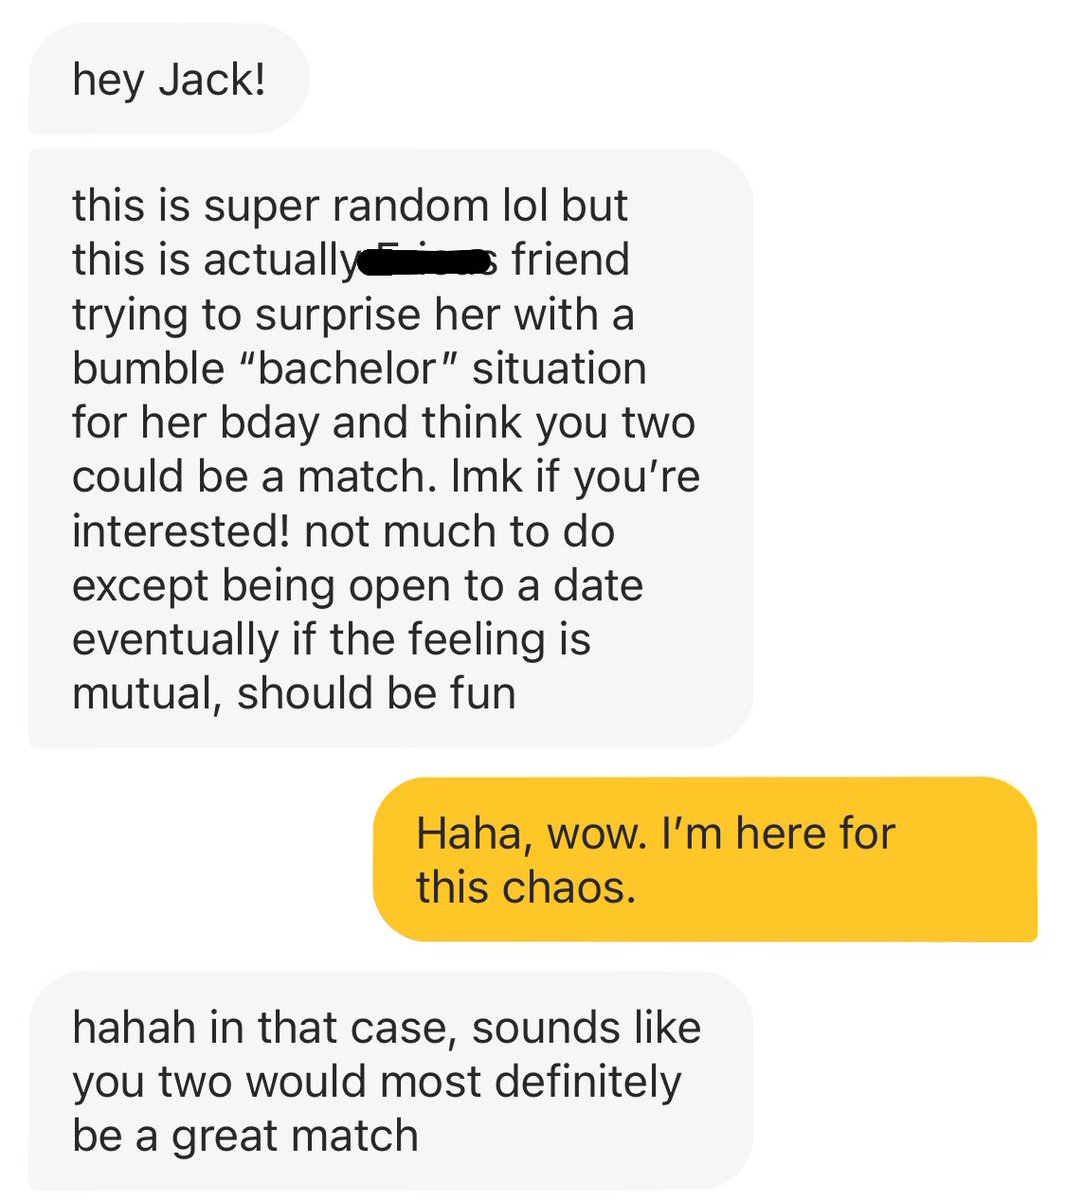 ALRIGHTY.So let's talk about the whole Bumble Bachelor process first. She gave me the rundown of the whole thing her friends went through.Here's that original message that started this ridiculousness.